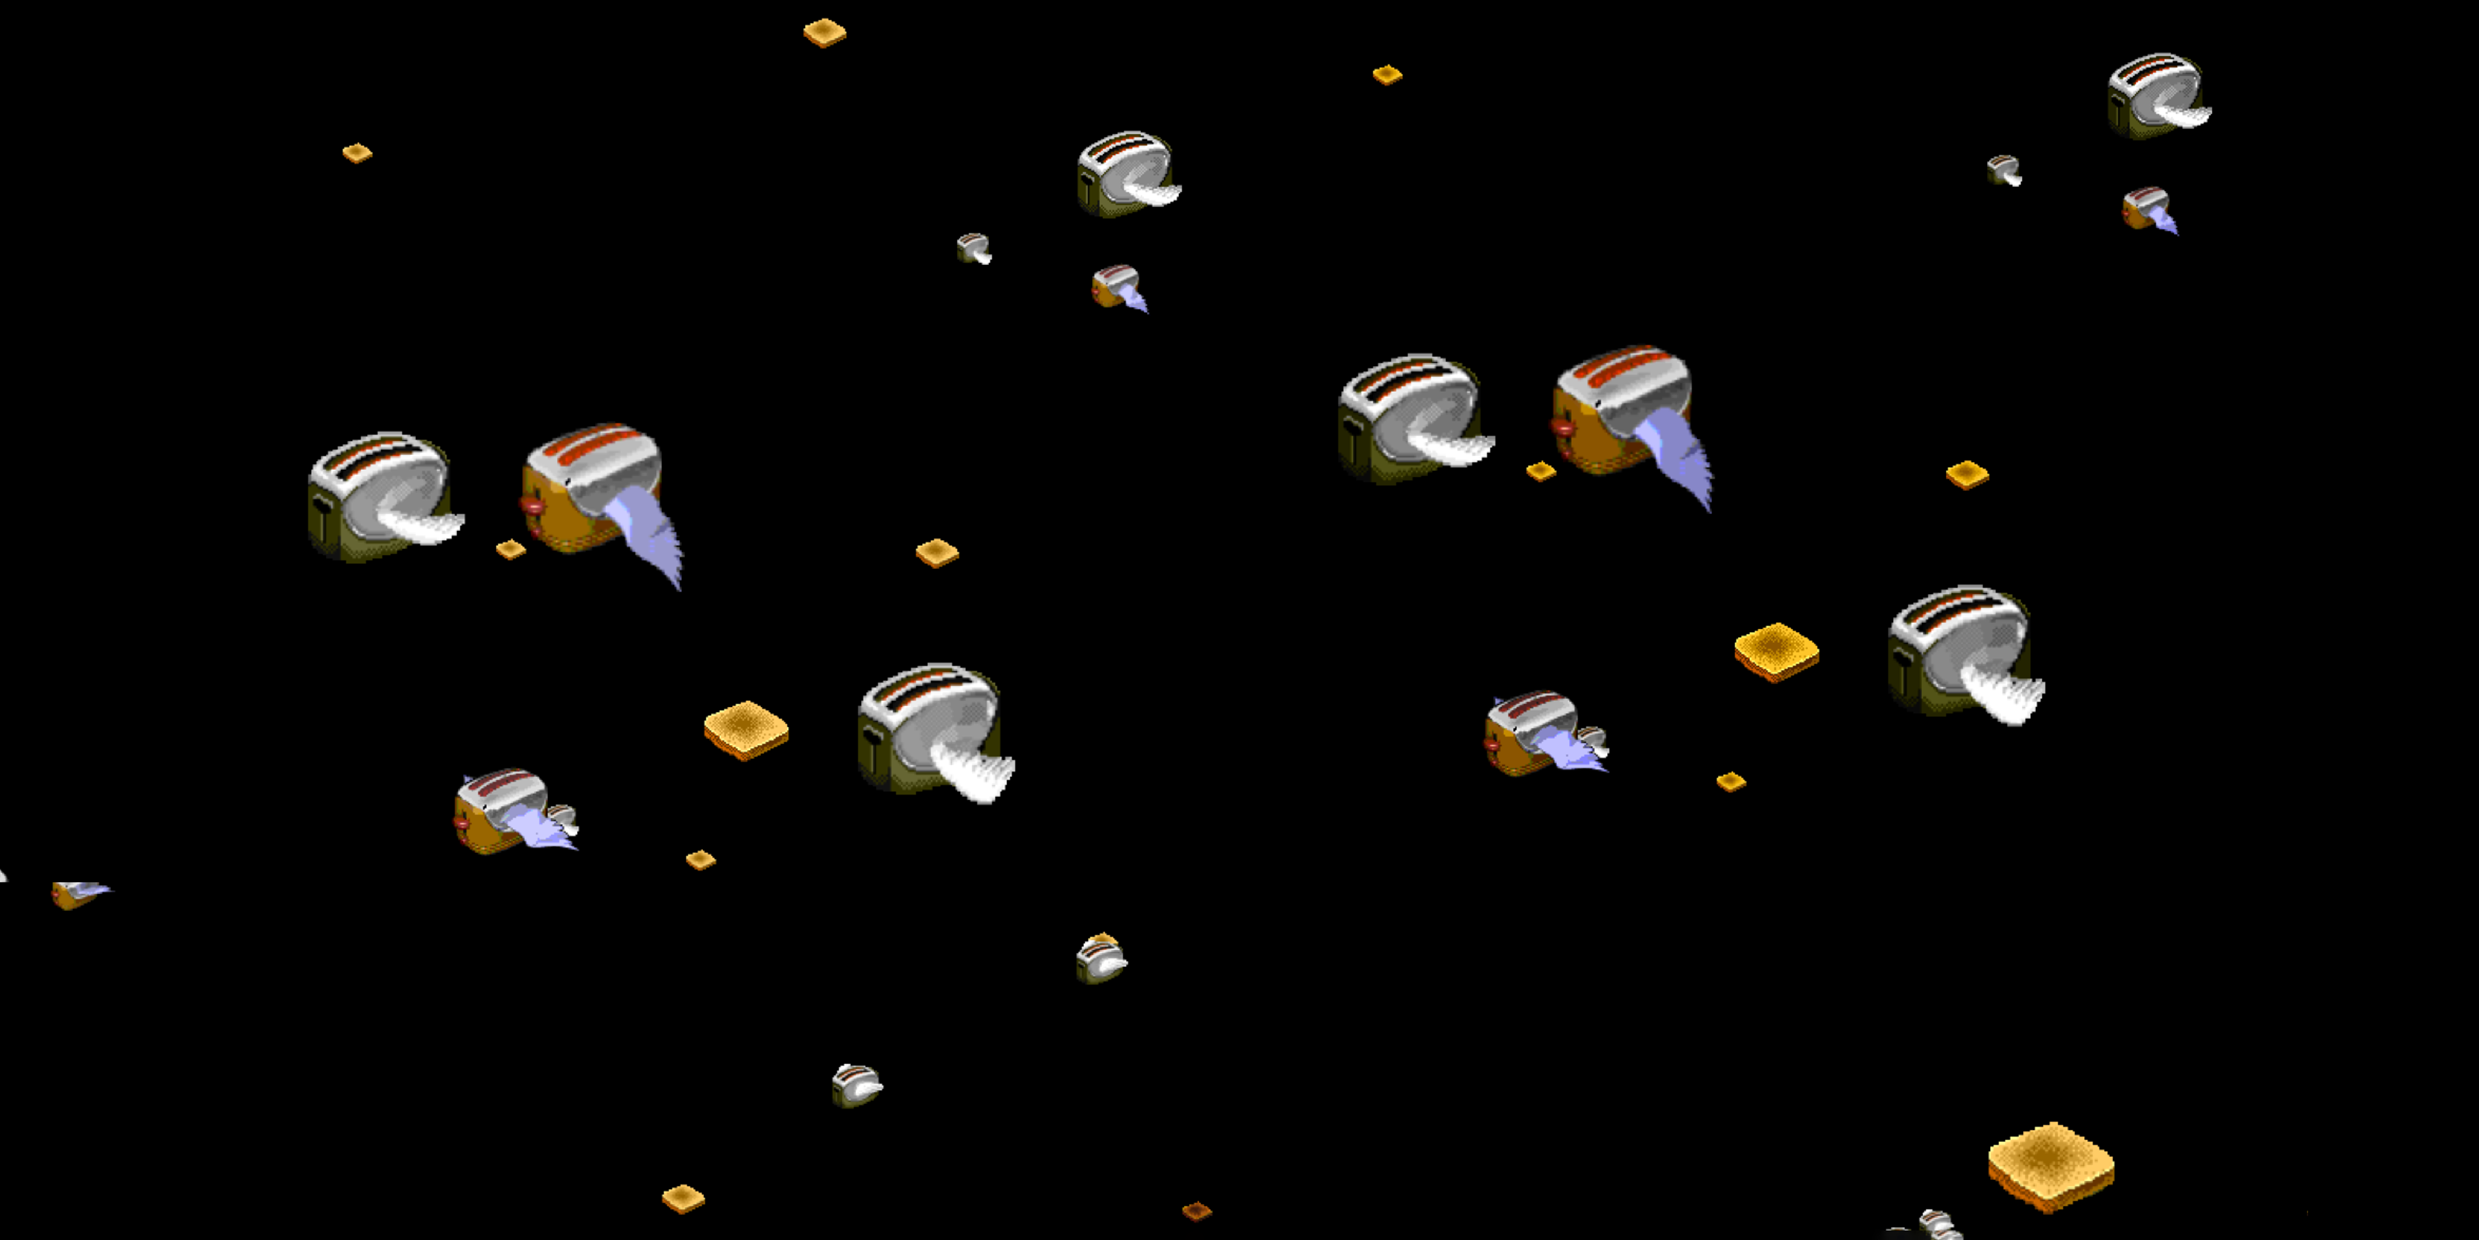 Computer image of flying toasters